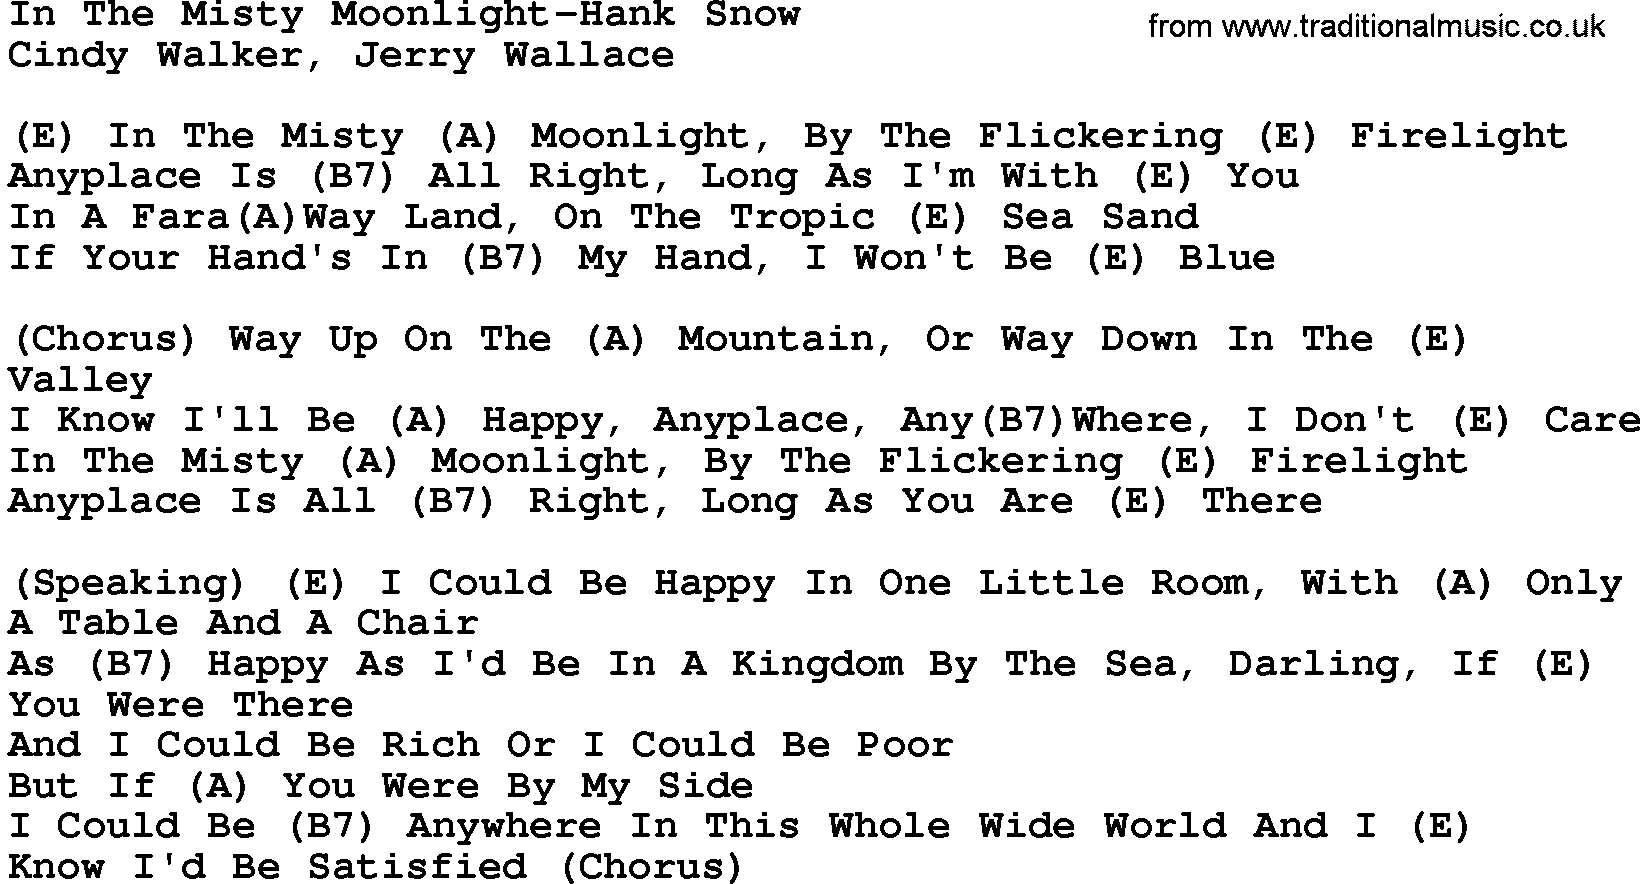 Country music song: In The Misty Moonlight-Hank Snow lyrics and chords